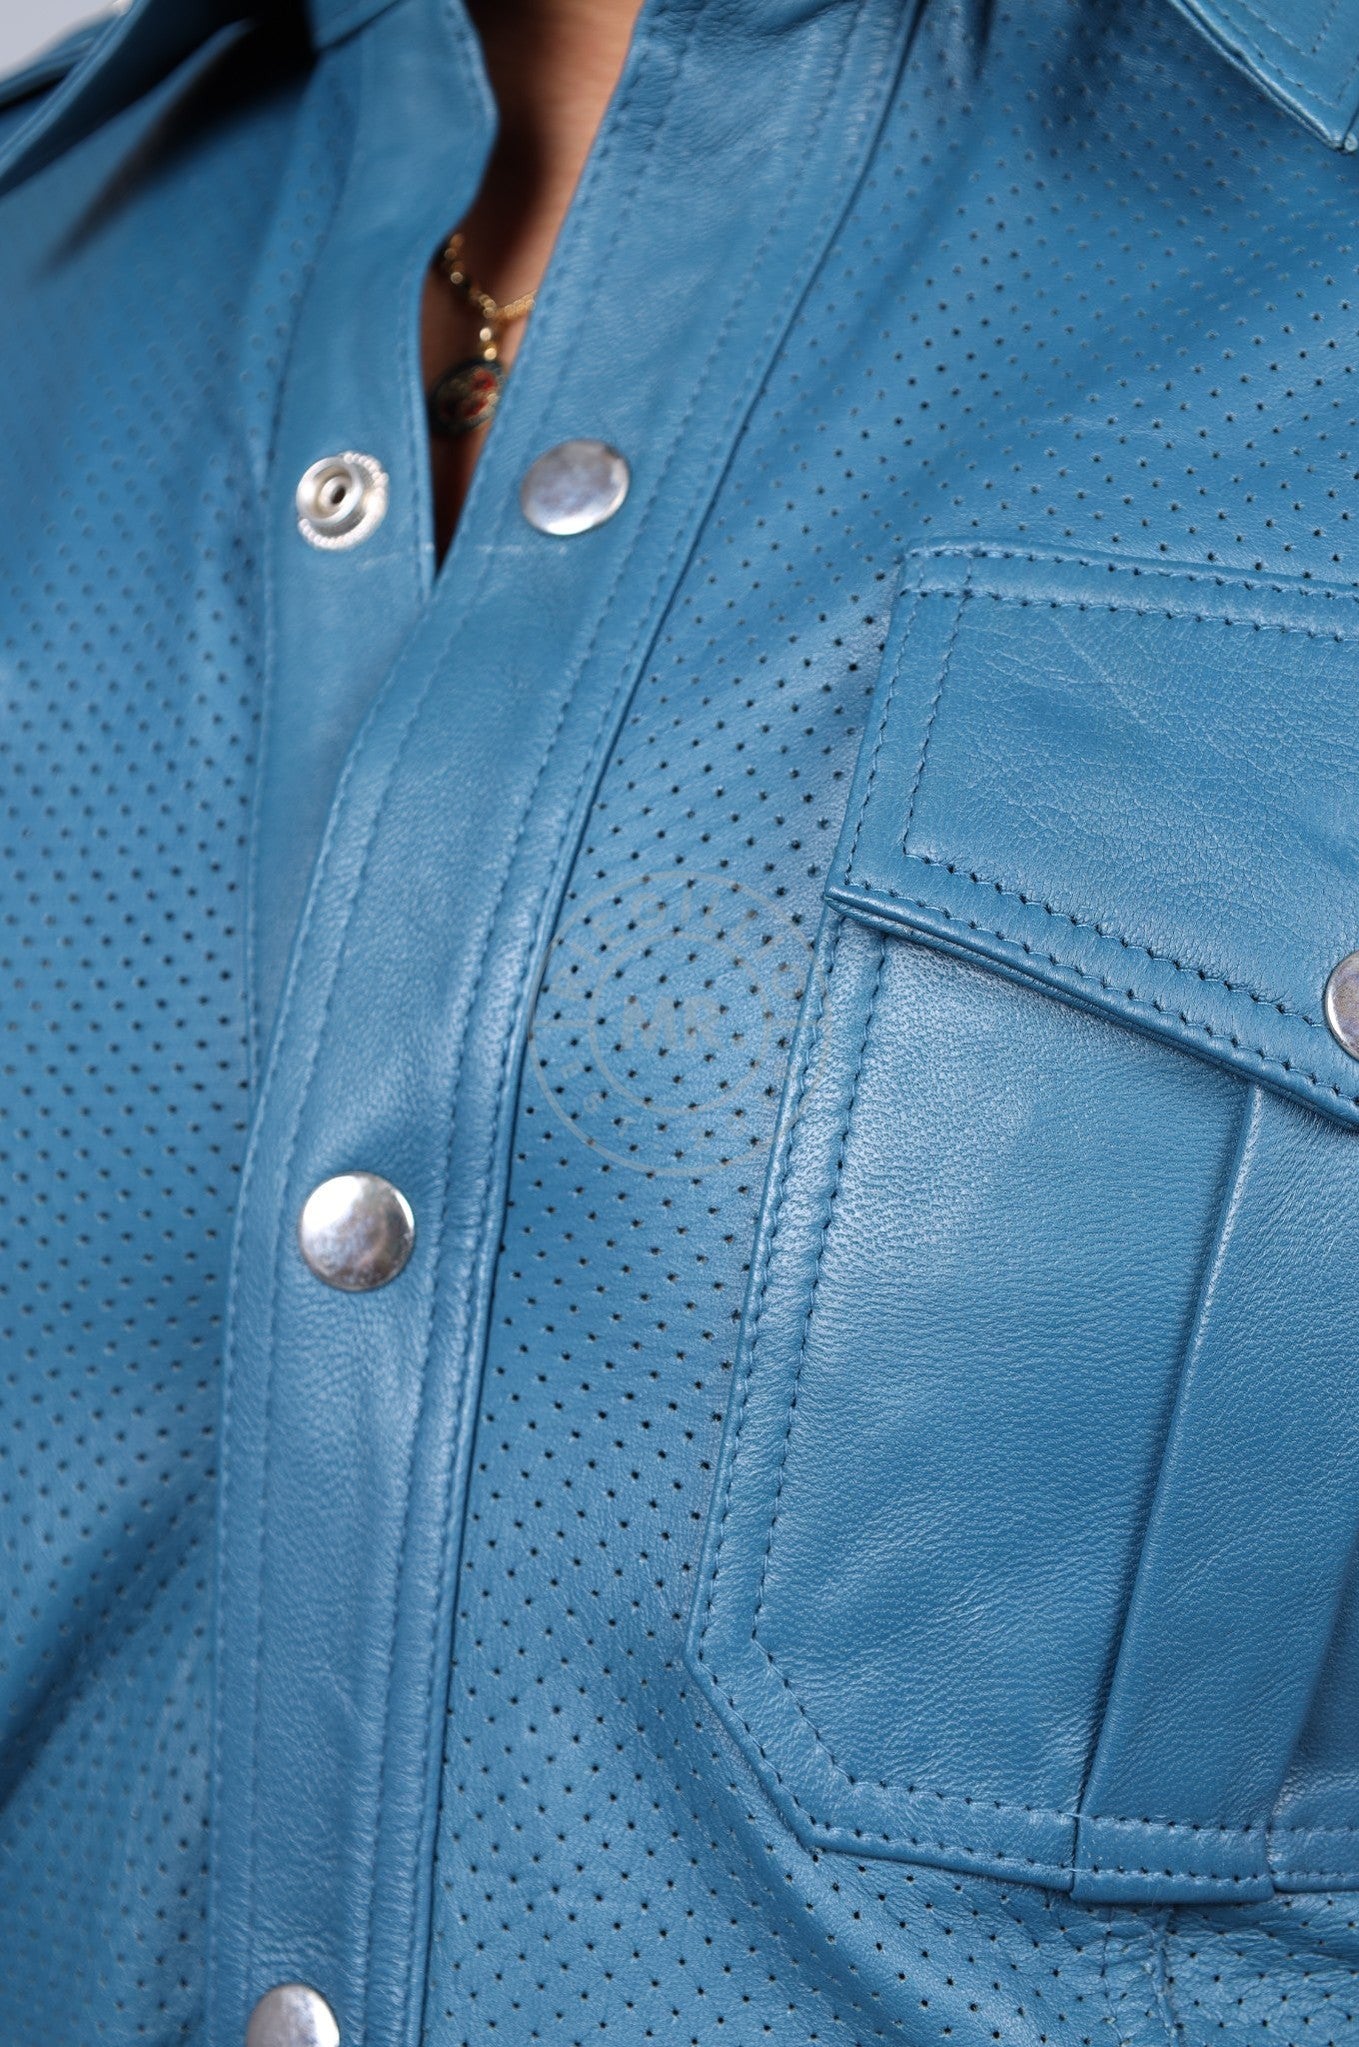 Jeans Blue Leather Perforated Shirt at MR. Riegillio